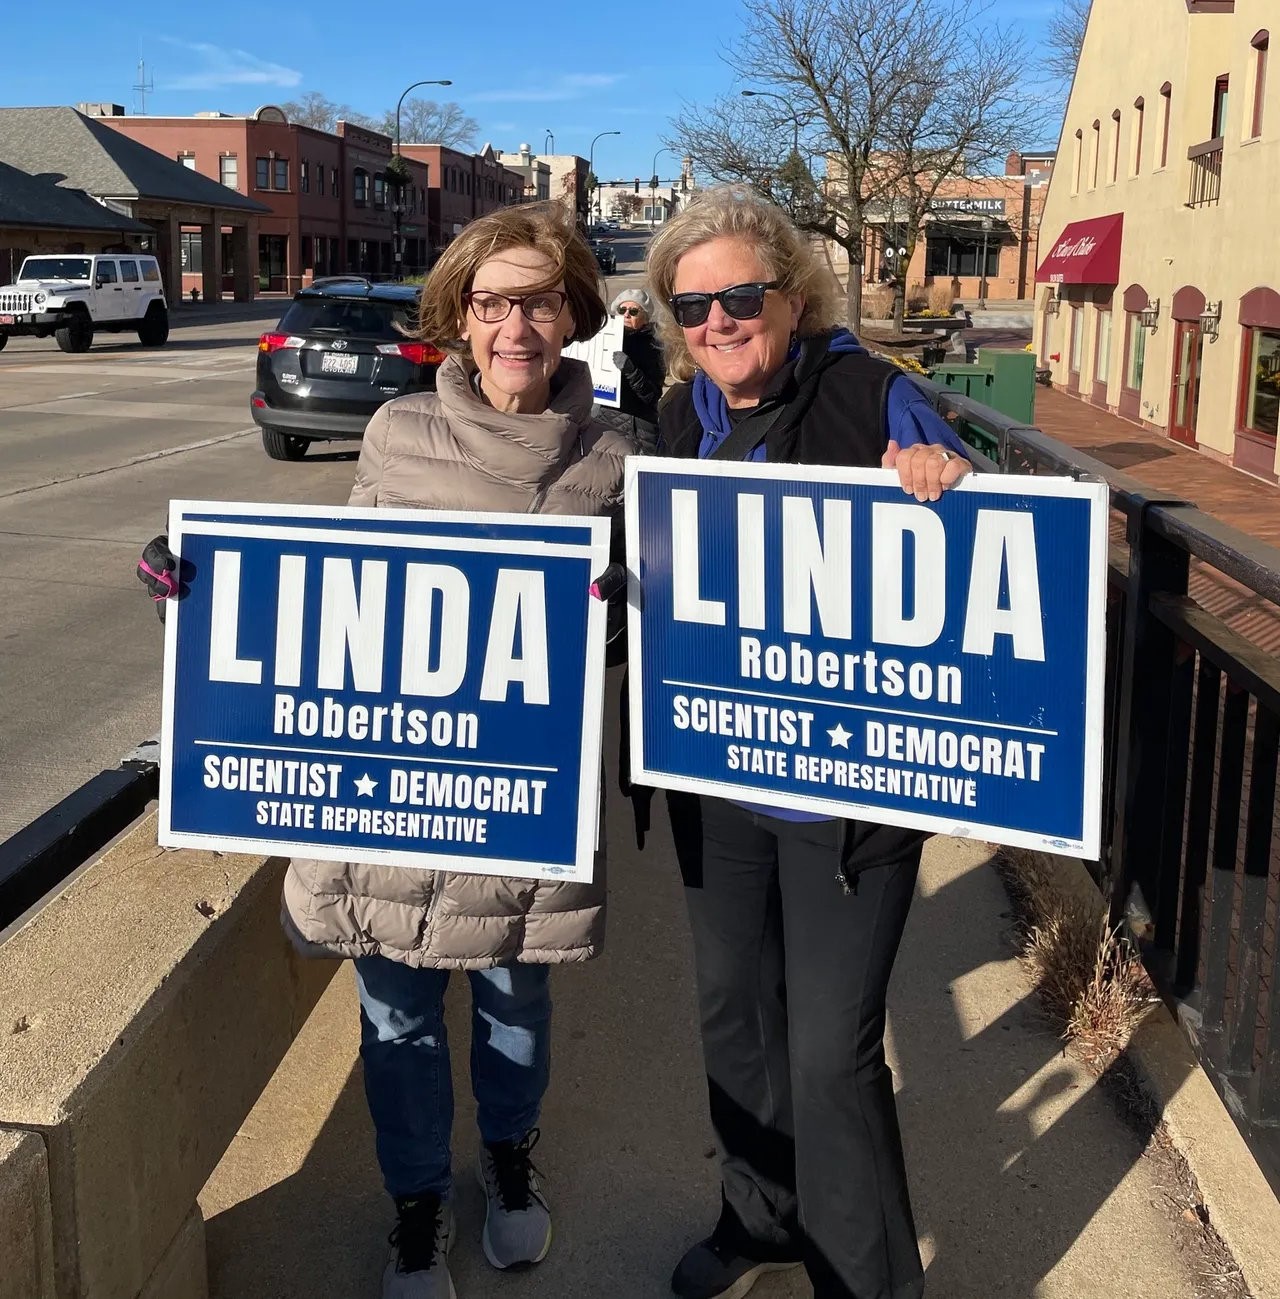 Linda Robertson, is running for IL65 district